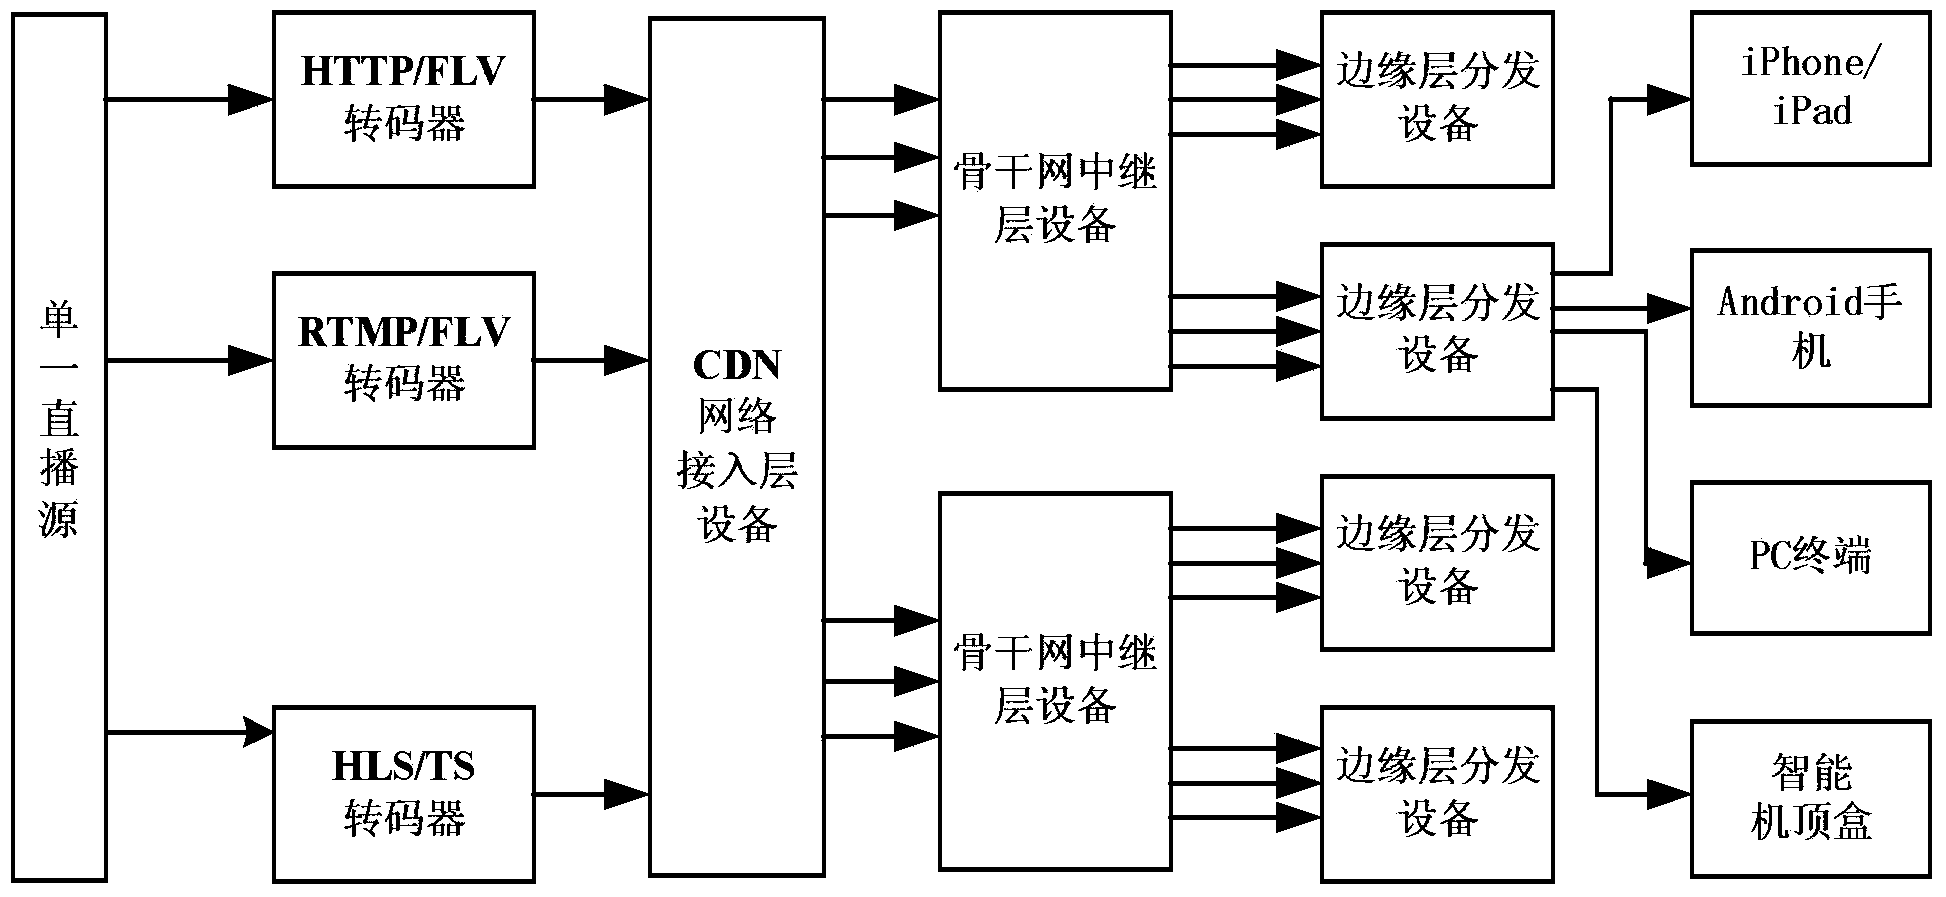 Data distribution system and method based on CDN (content distribution network)